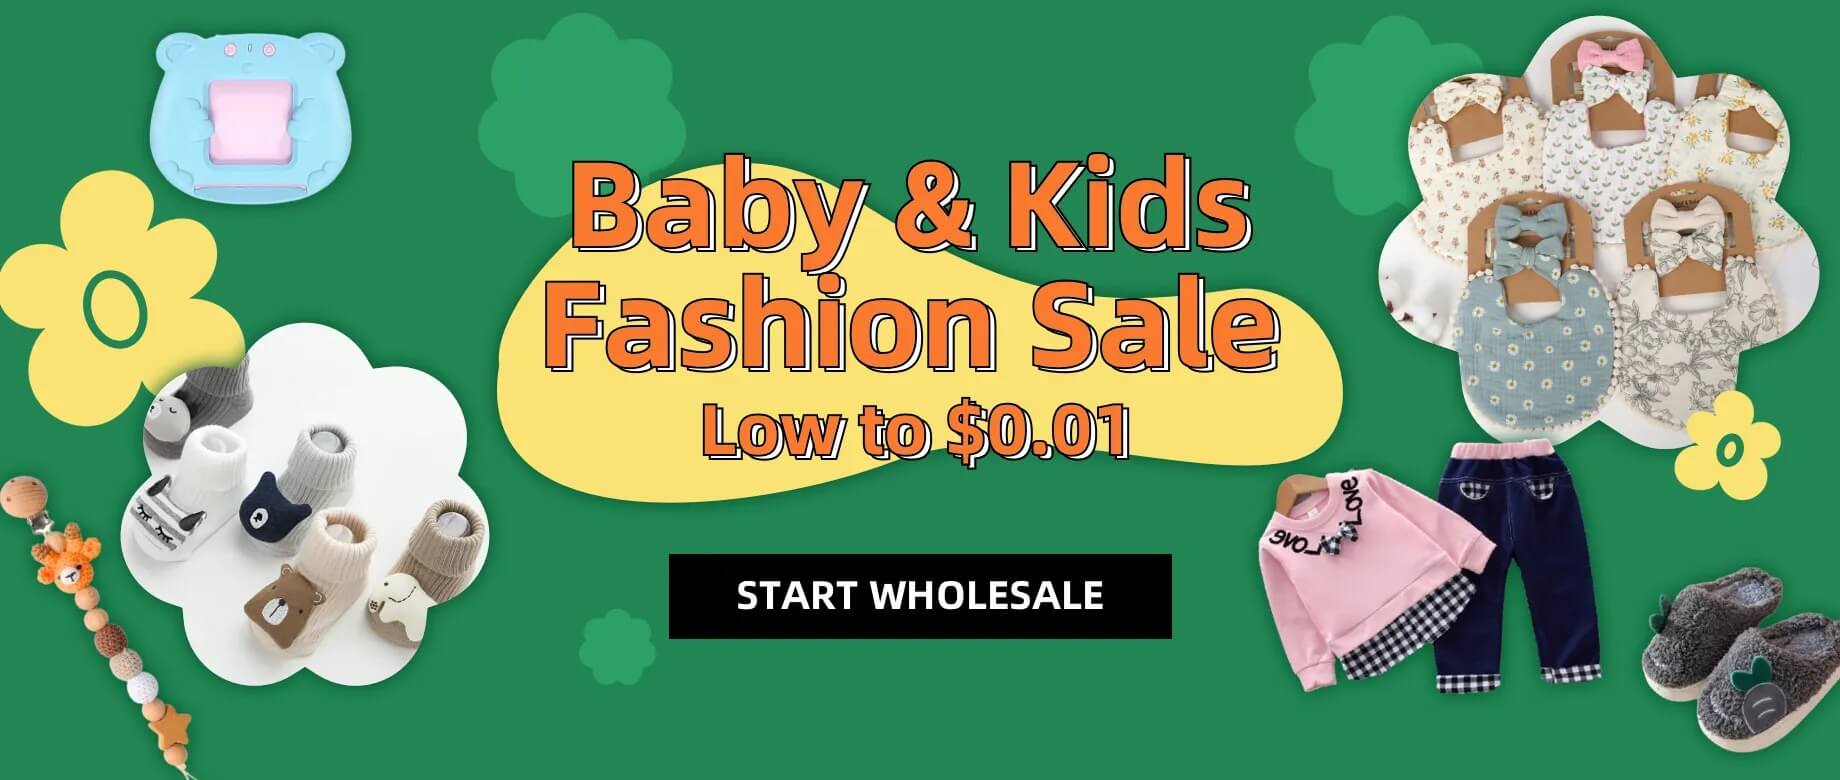 “PROFITABLE BABY & KIDS CLOTHING BUSINESS WITH LOW INVESTMENT” is locked PROFITABLE BABY & KIDS CLOTHING BUSINESS WITH LOW INVESTMENT